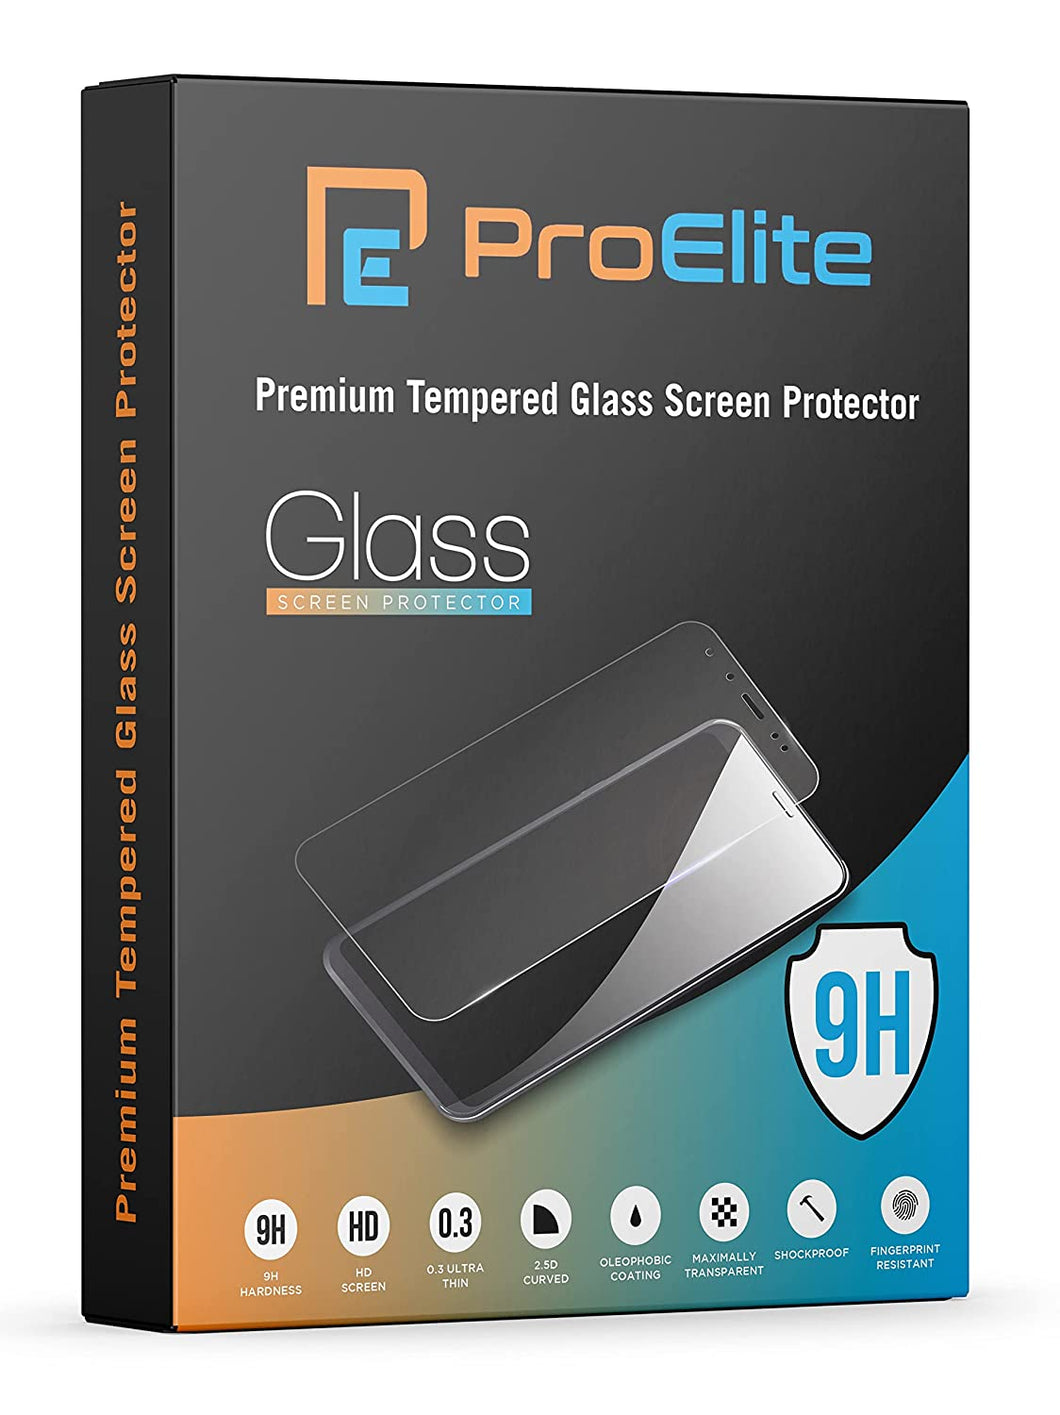 ProElite Premium Tempered Glass Screen Protector for Lenovo Tab M10 FHD 3rd Gen 10.1 inch